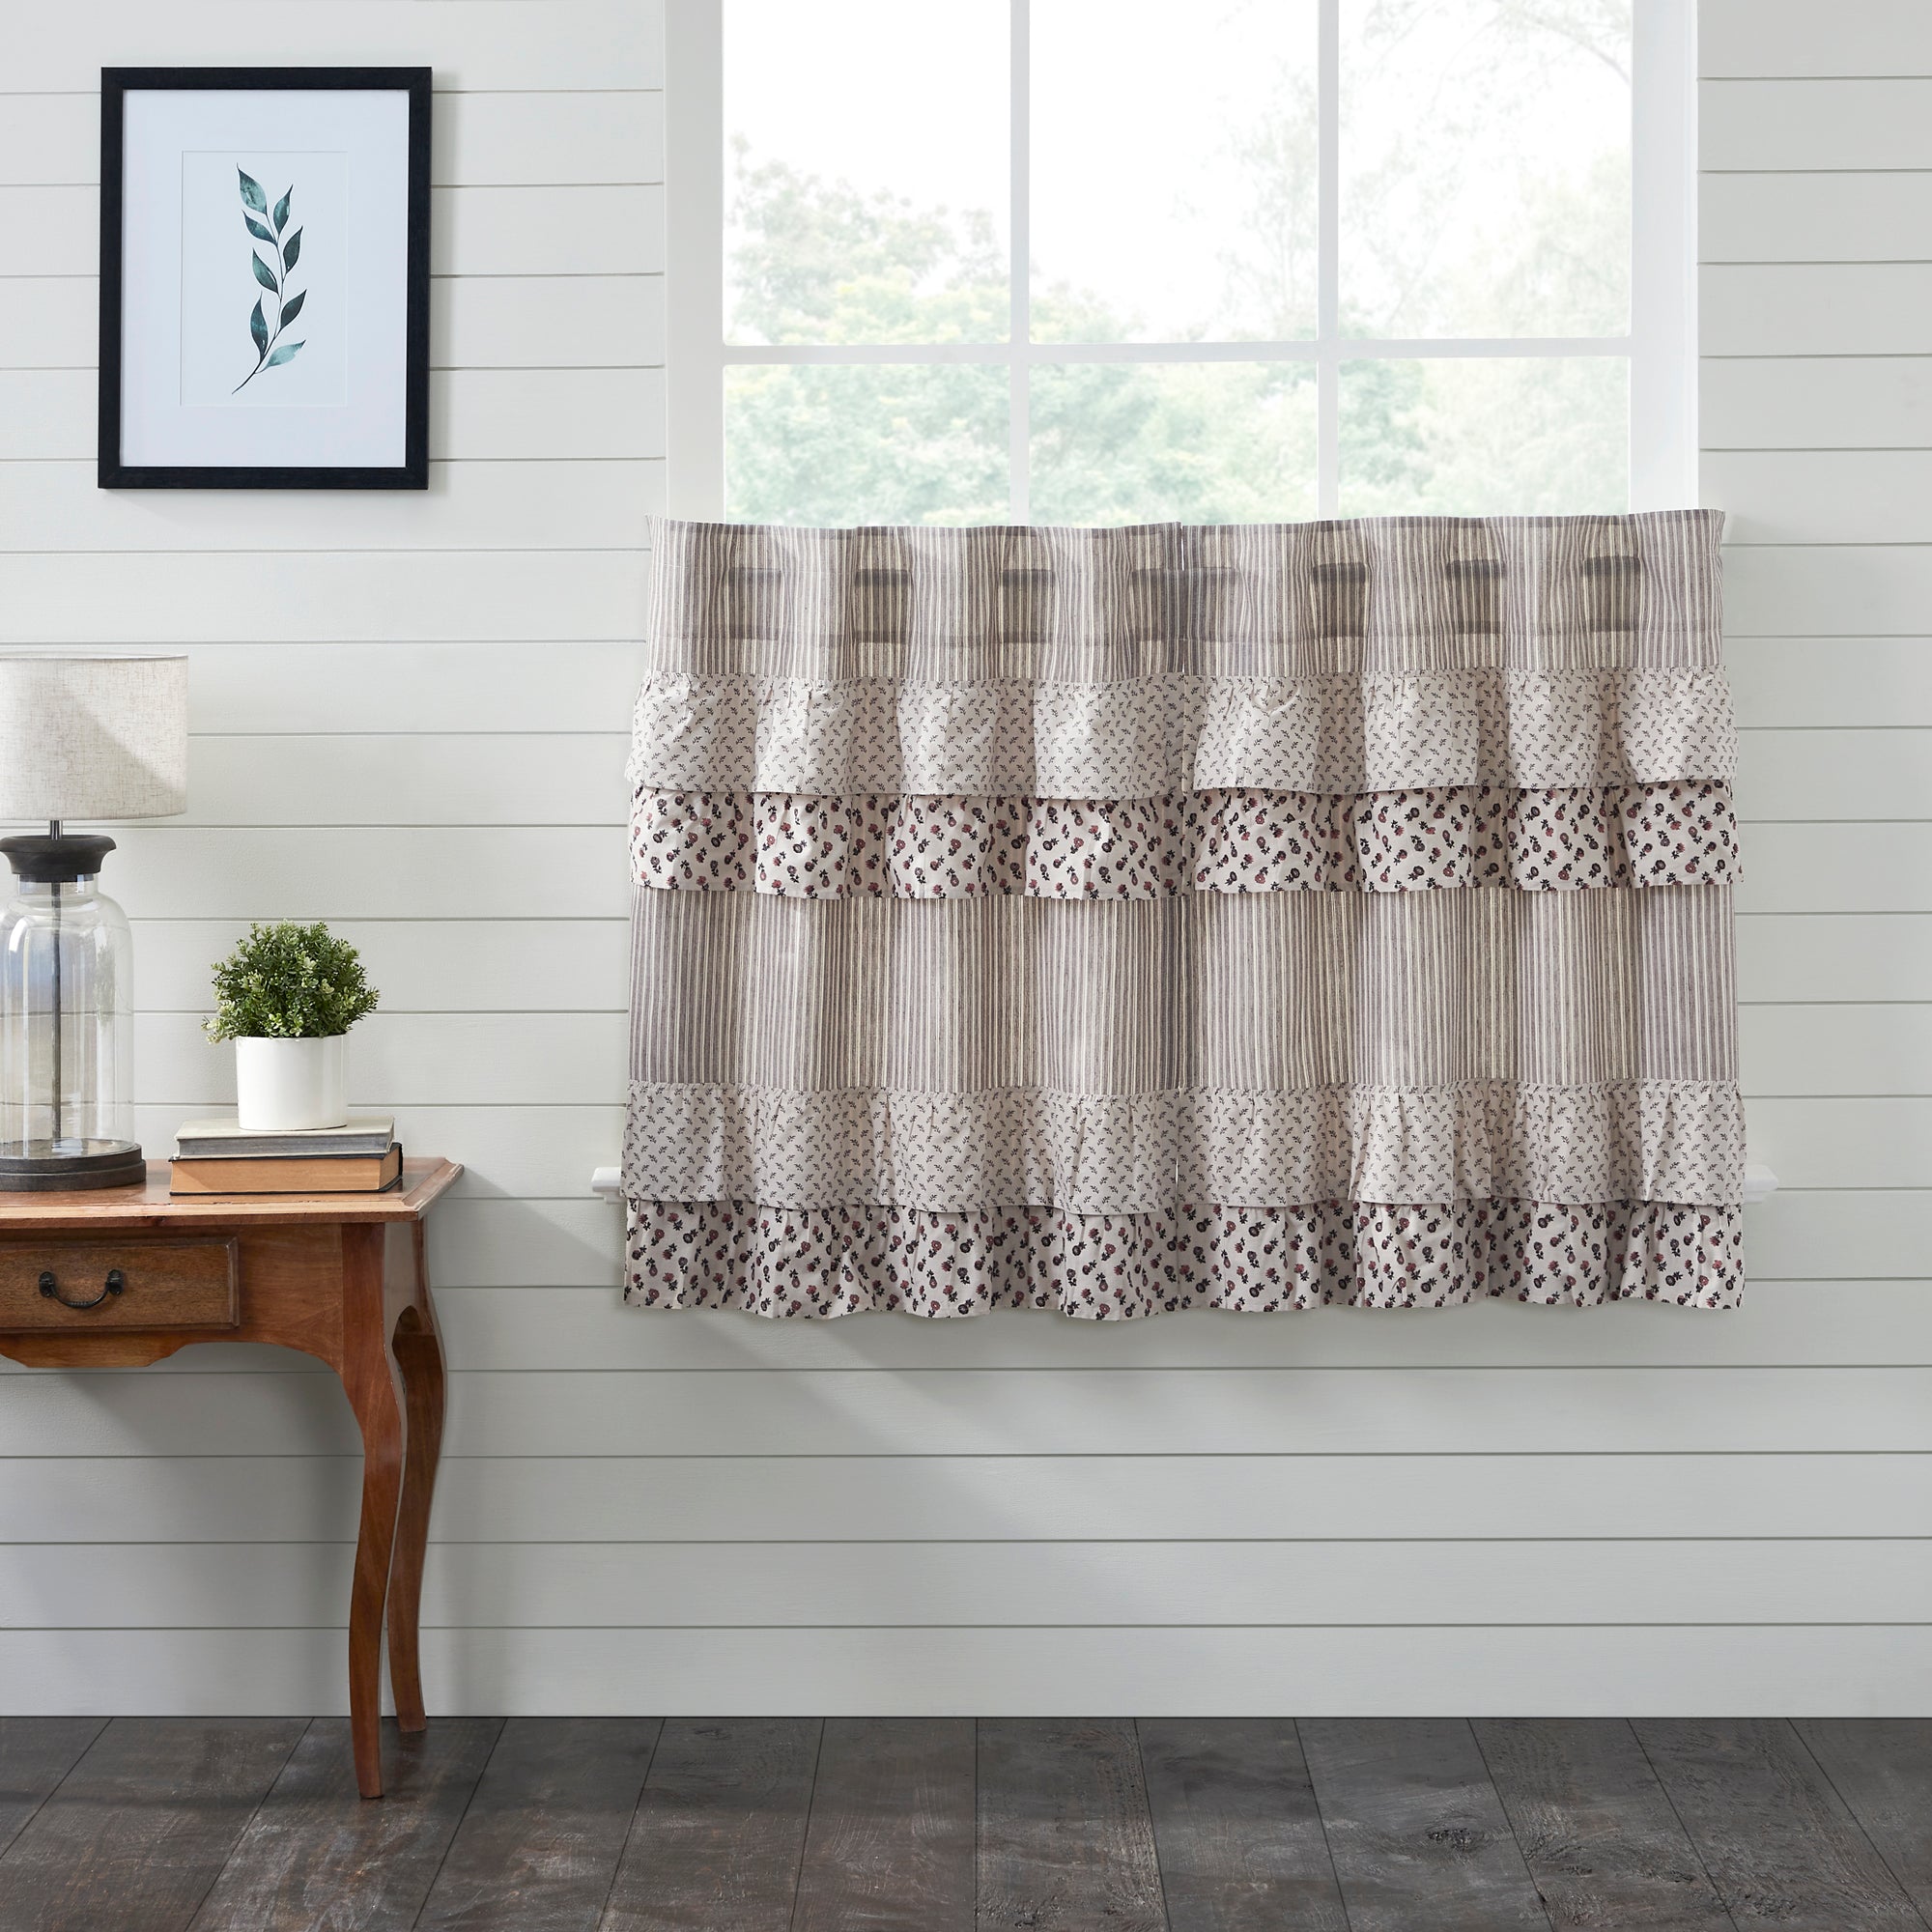 Florette Ruffled Tier Curtain Set of 2 L36xW36 VHC Brands